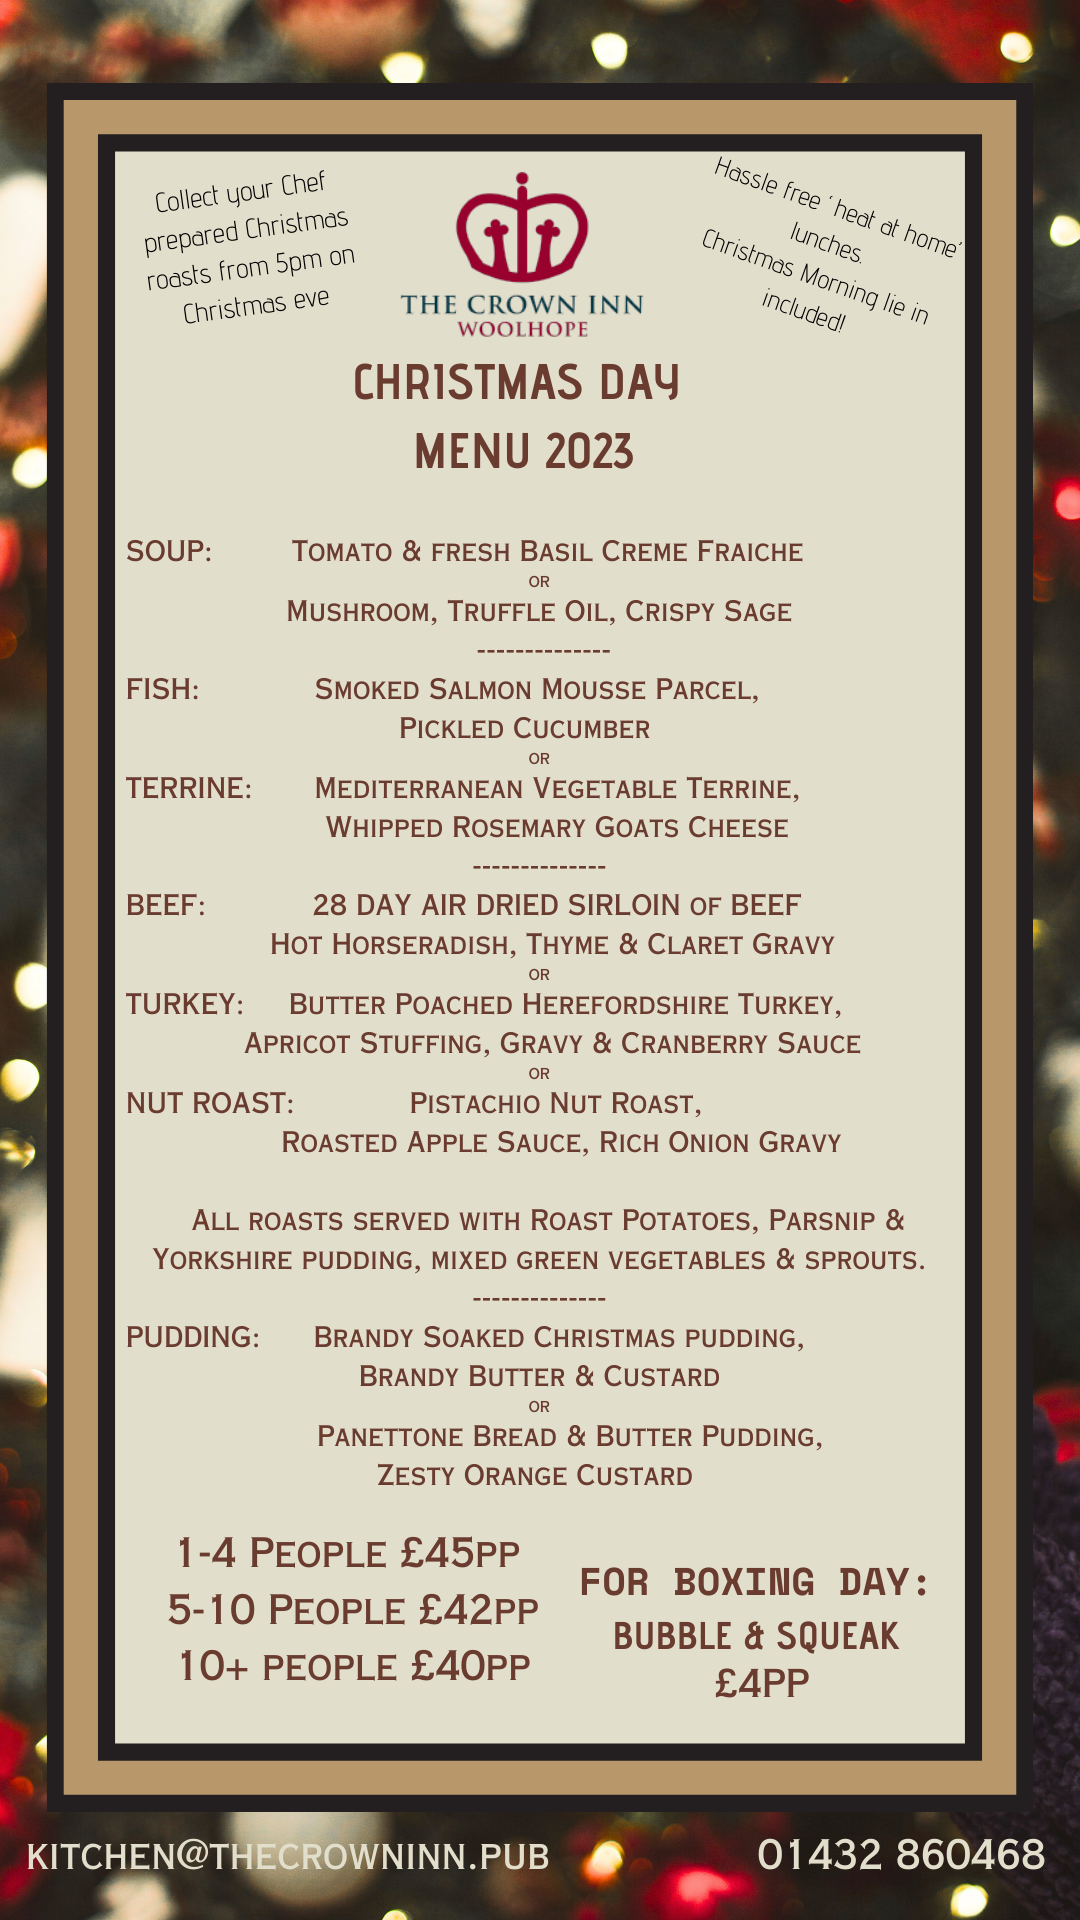 https://thecrowninn.pub/wp-content/uploads/2023/11/MENU-HEAT-AT-hOME-cHRISTMAS-dAY-Instagram-Story-1.png